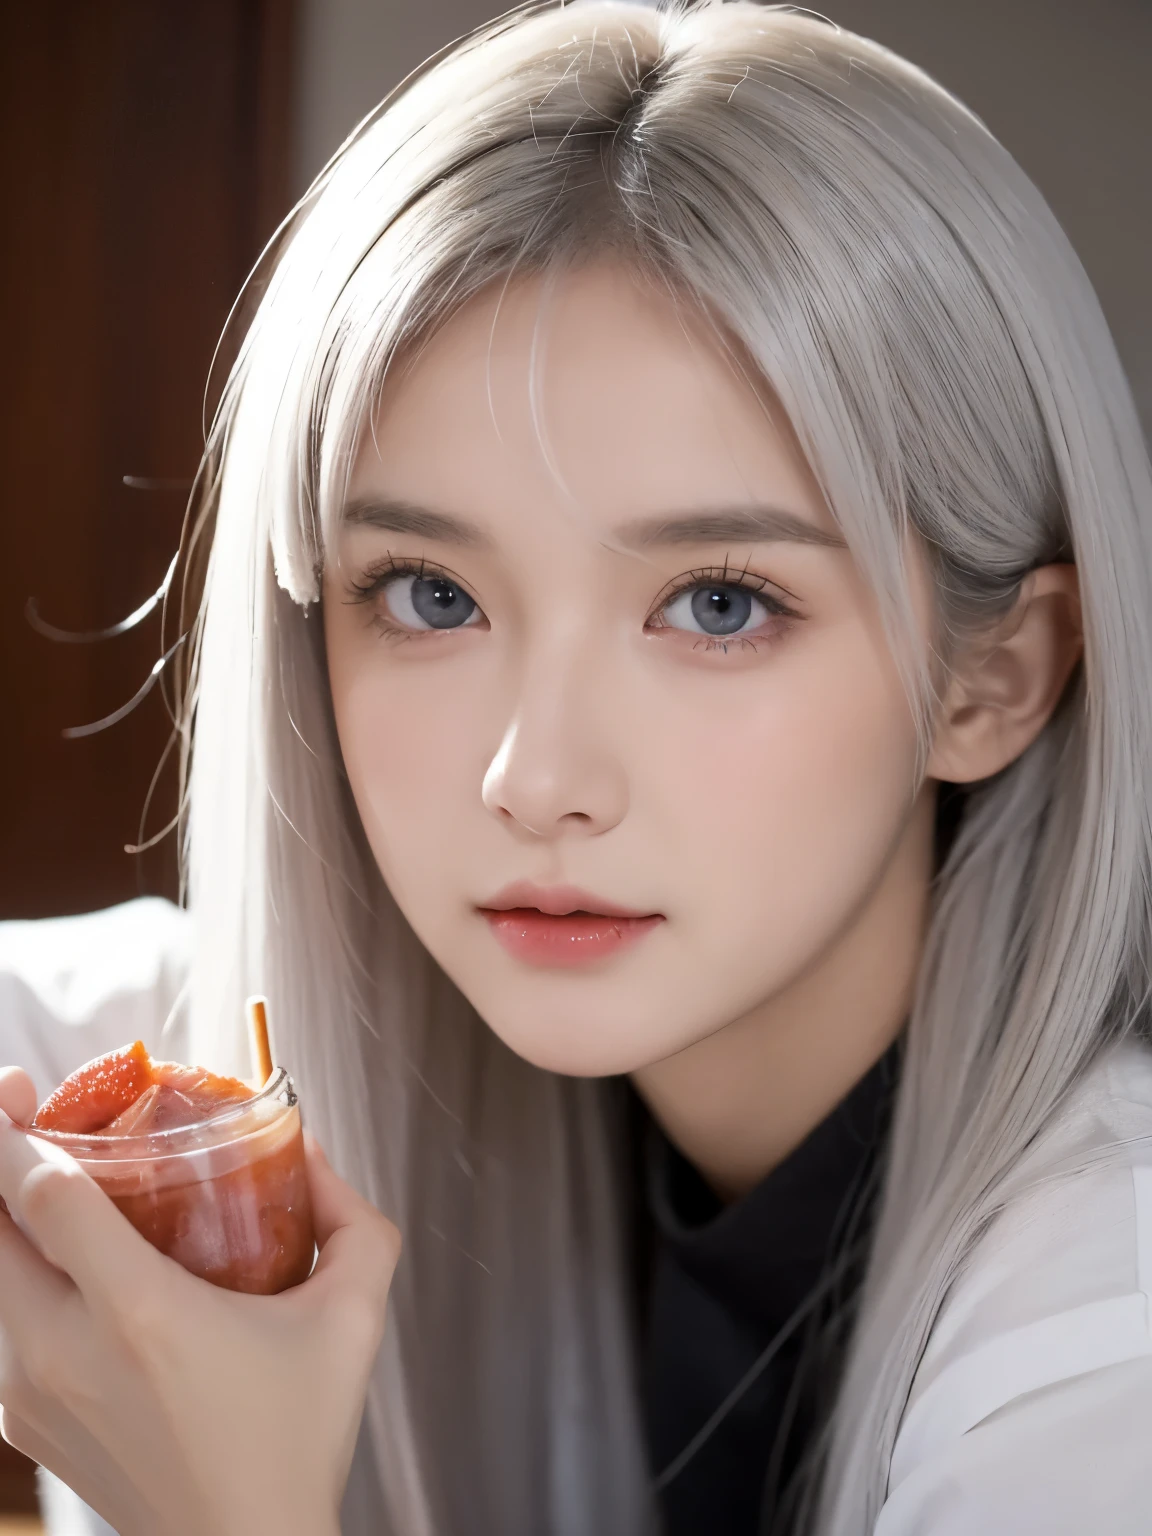 Show word copy make a girl with pink skin, pretty eyes (red eyes) as deep as the night sky, Half sad face lying on the table, White hair, looking at you, With anime/Semi-realistic art style